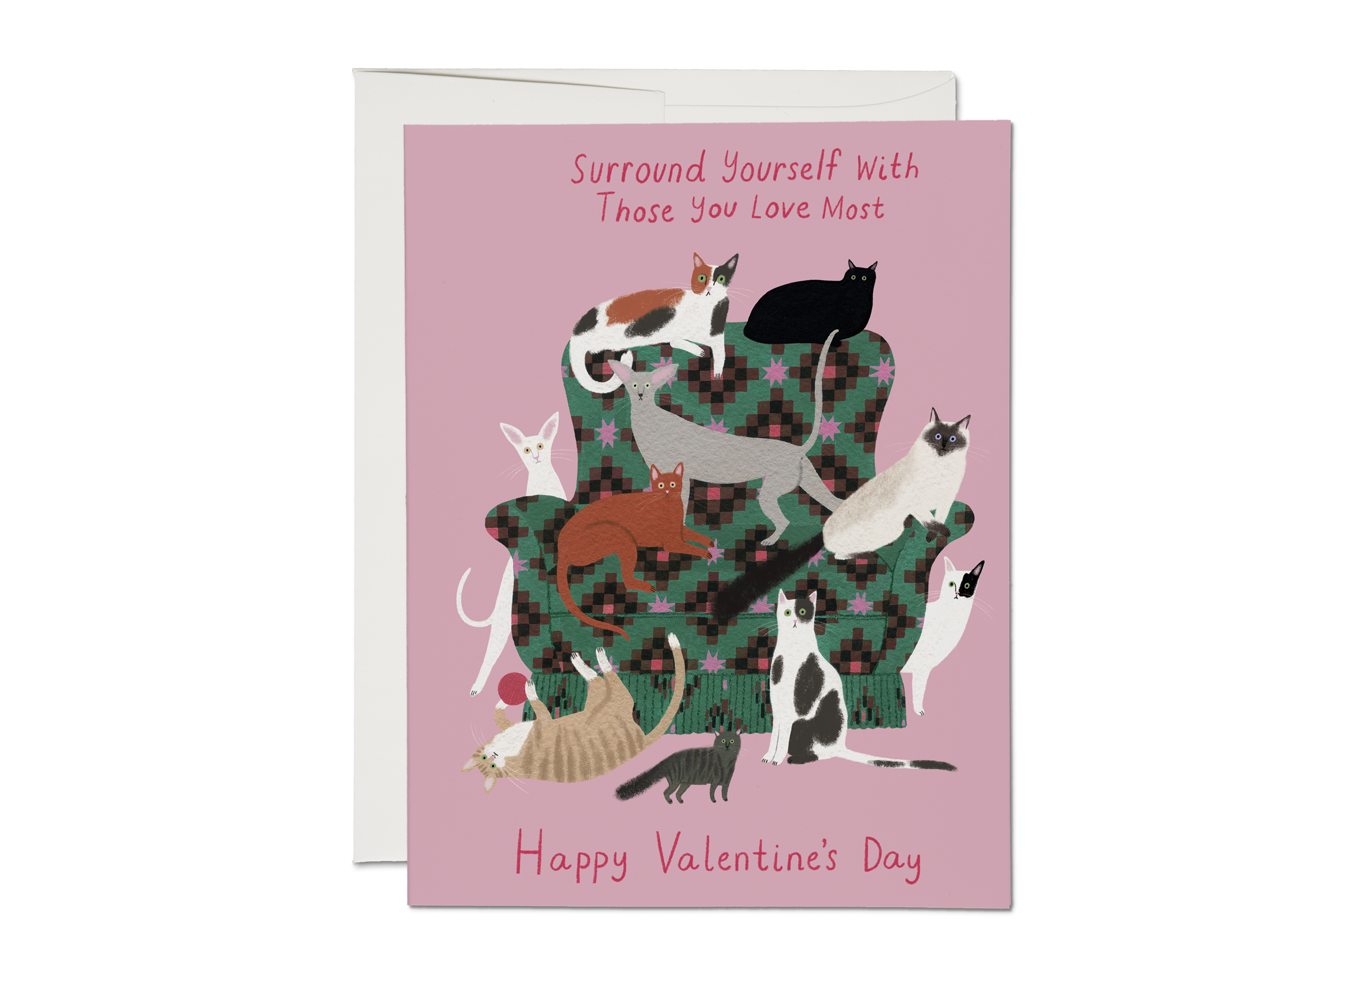 Surround Youself Valentine's Day greeting card